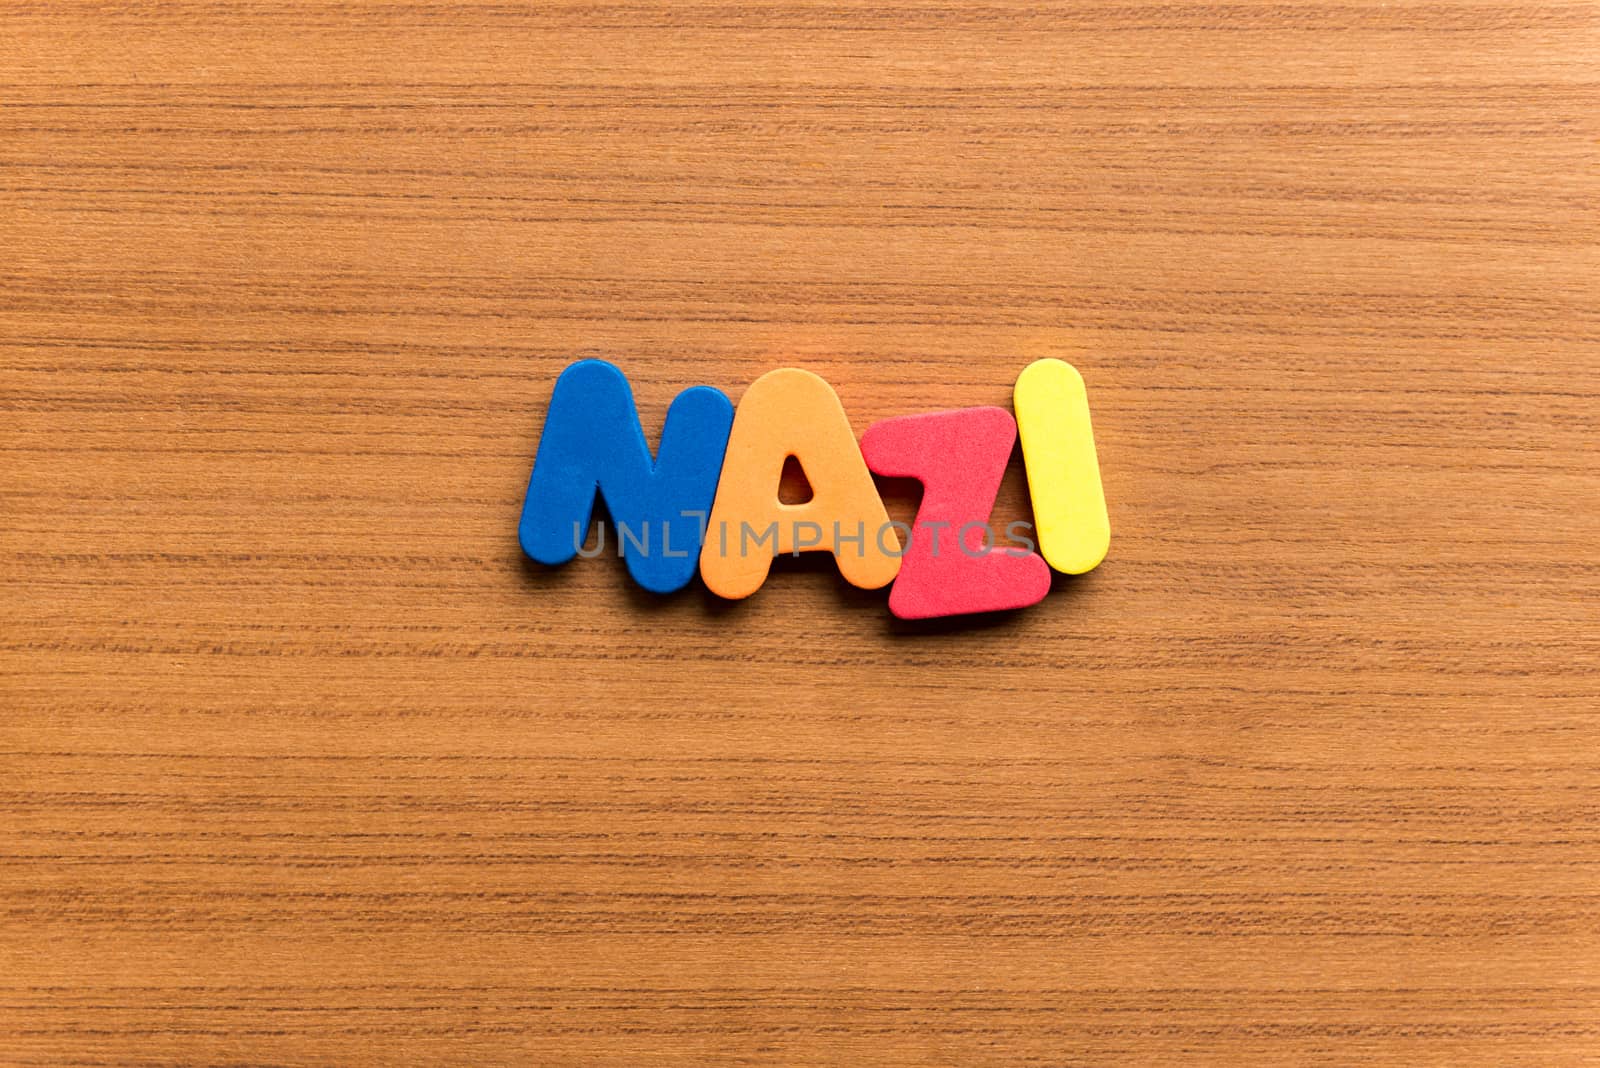 nazi colorful word on the wooden background